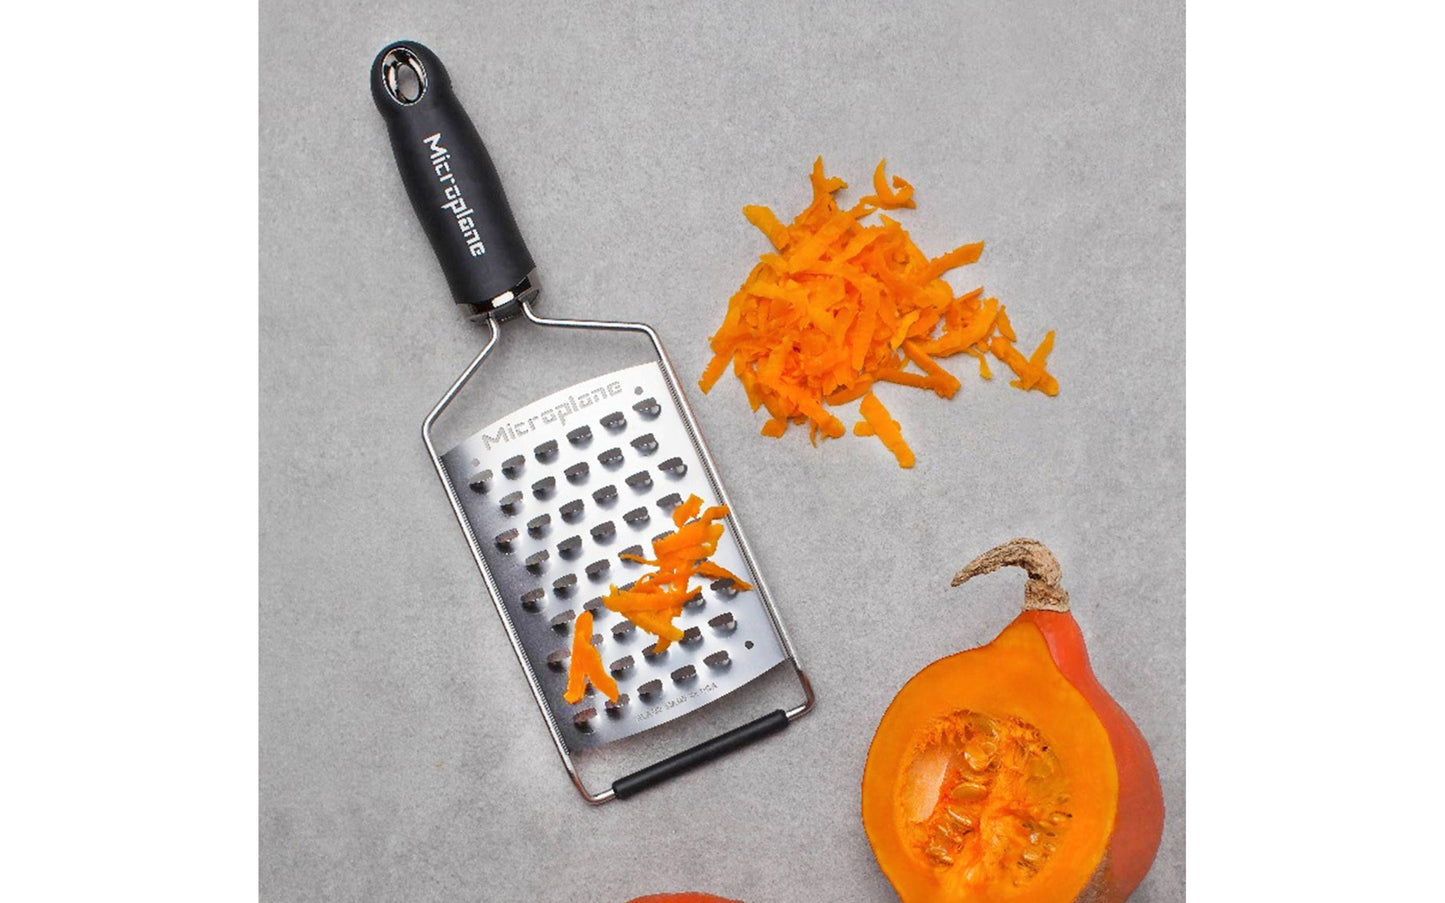 Made in USA - Blade made in USA - Great for Apples, Cabbage, Carrots, Hard & Soft Cheeses, Pumpkin, Onions, & Zucchini - Non-slip grip - Dishwasher safe - Razor-sharp blade made from stainless steel - 18/8 grade - 4" wide blade ~ No-slip base - Gourmet Series Ultra Coarse Grater - non-skid foot - 45011 - Comfort Handle - 098399450117